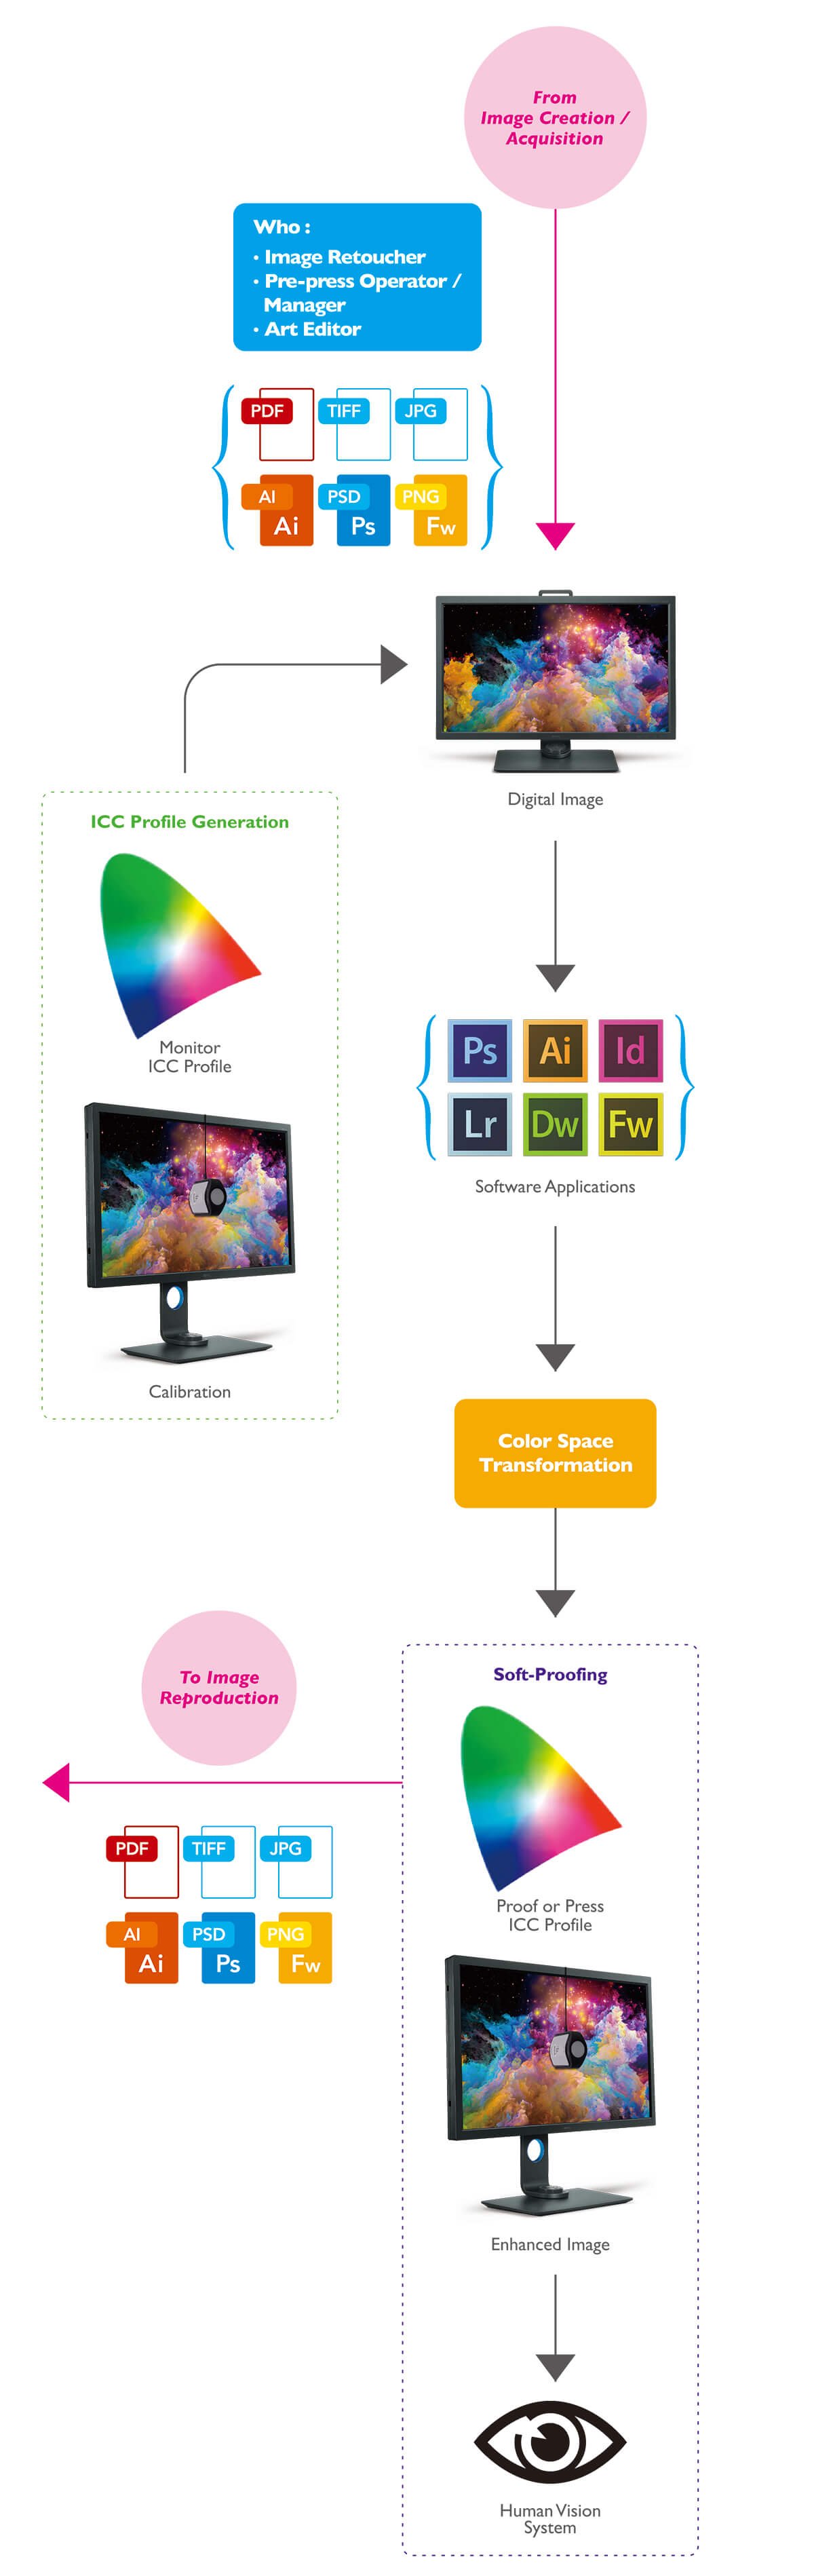 Typical Color Management Workflow for Image Enhancement.